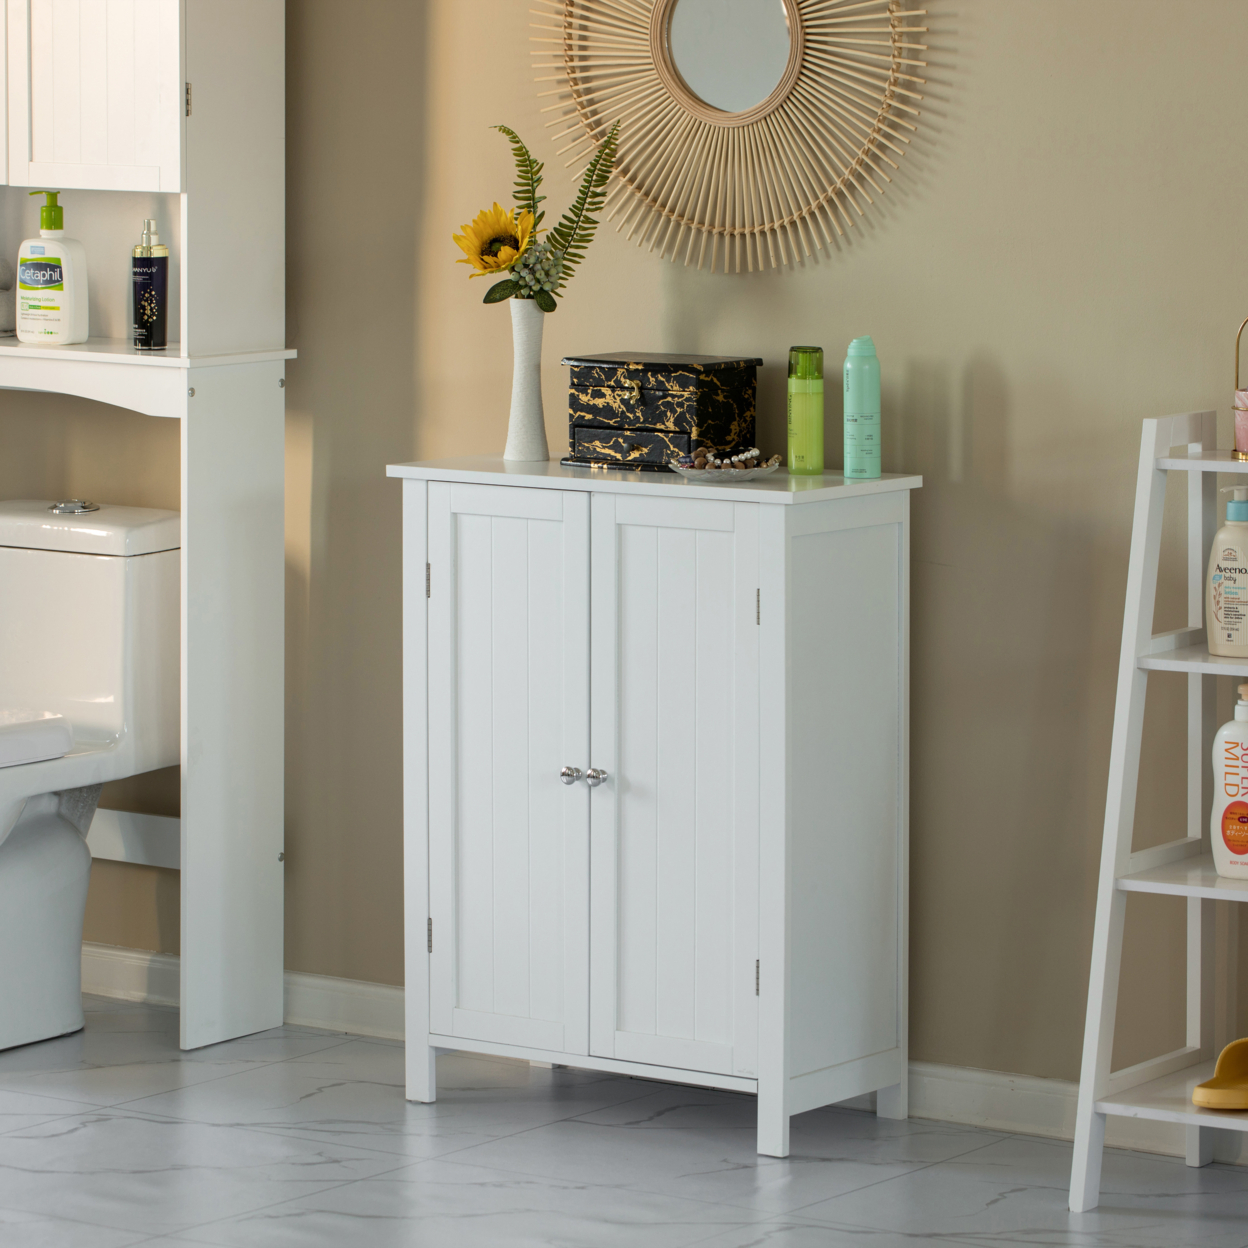 White Wooden Bathroom Cabinet With Double Doors And Adjustable Shelves Modern Vanity Storage